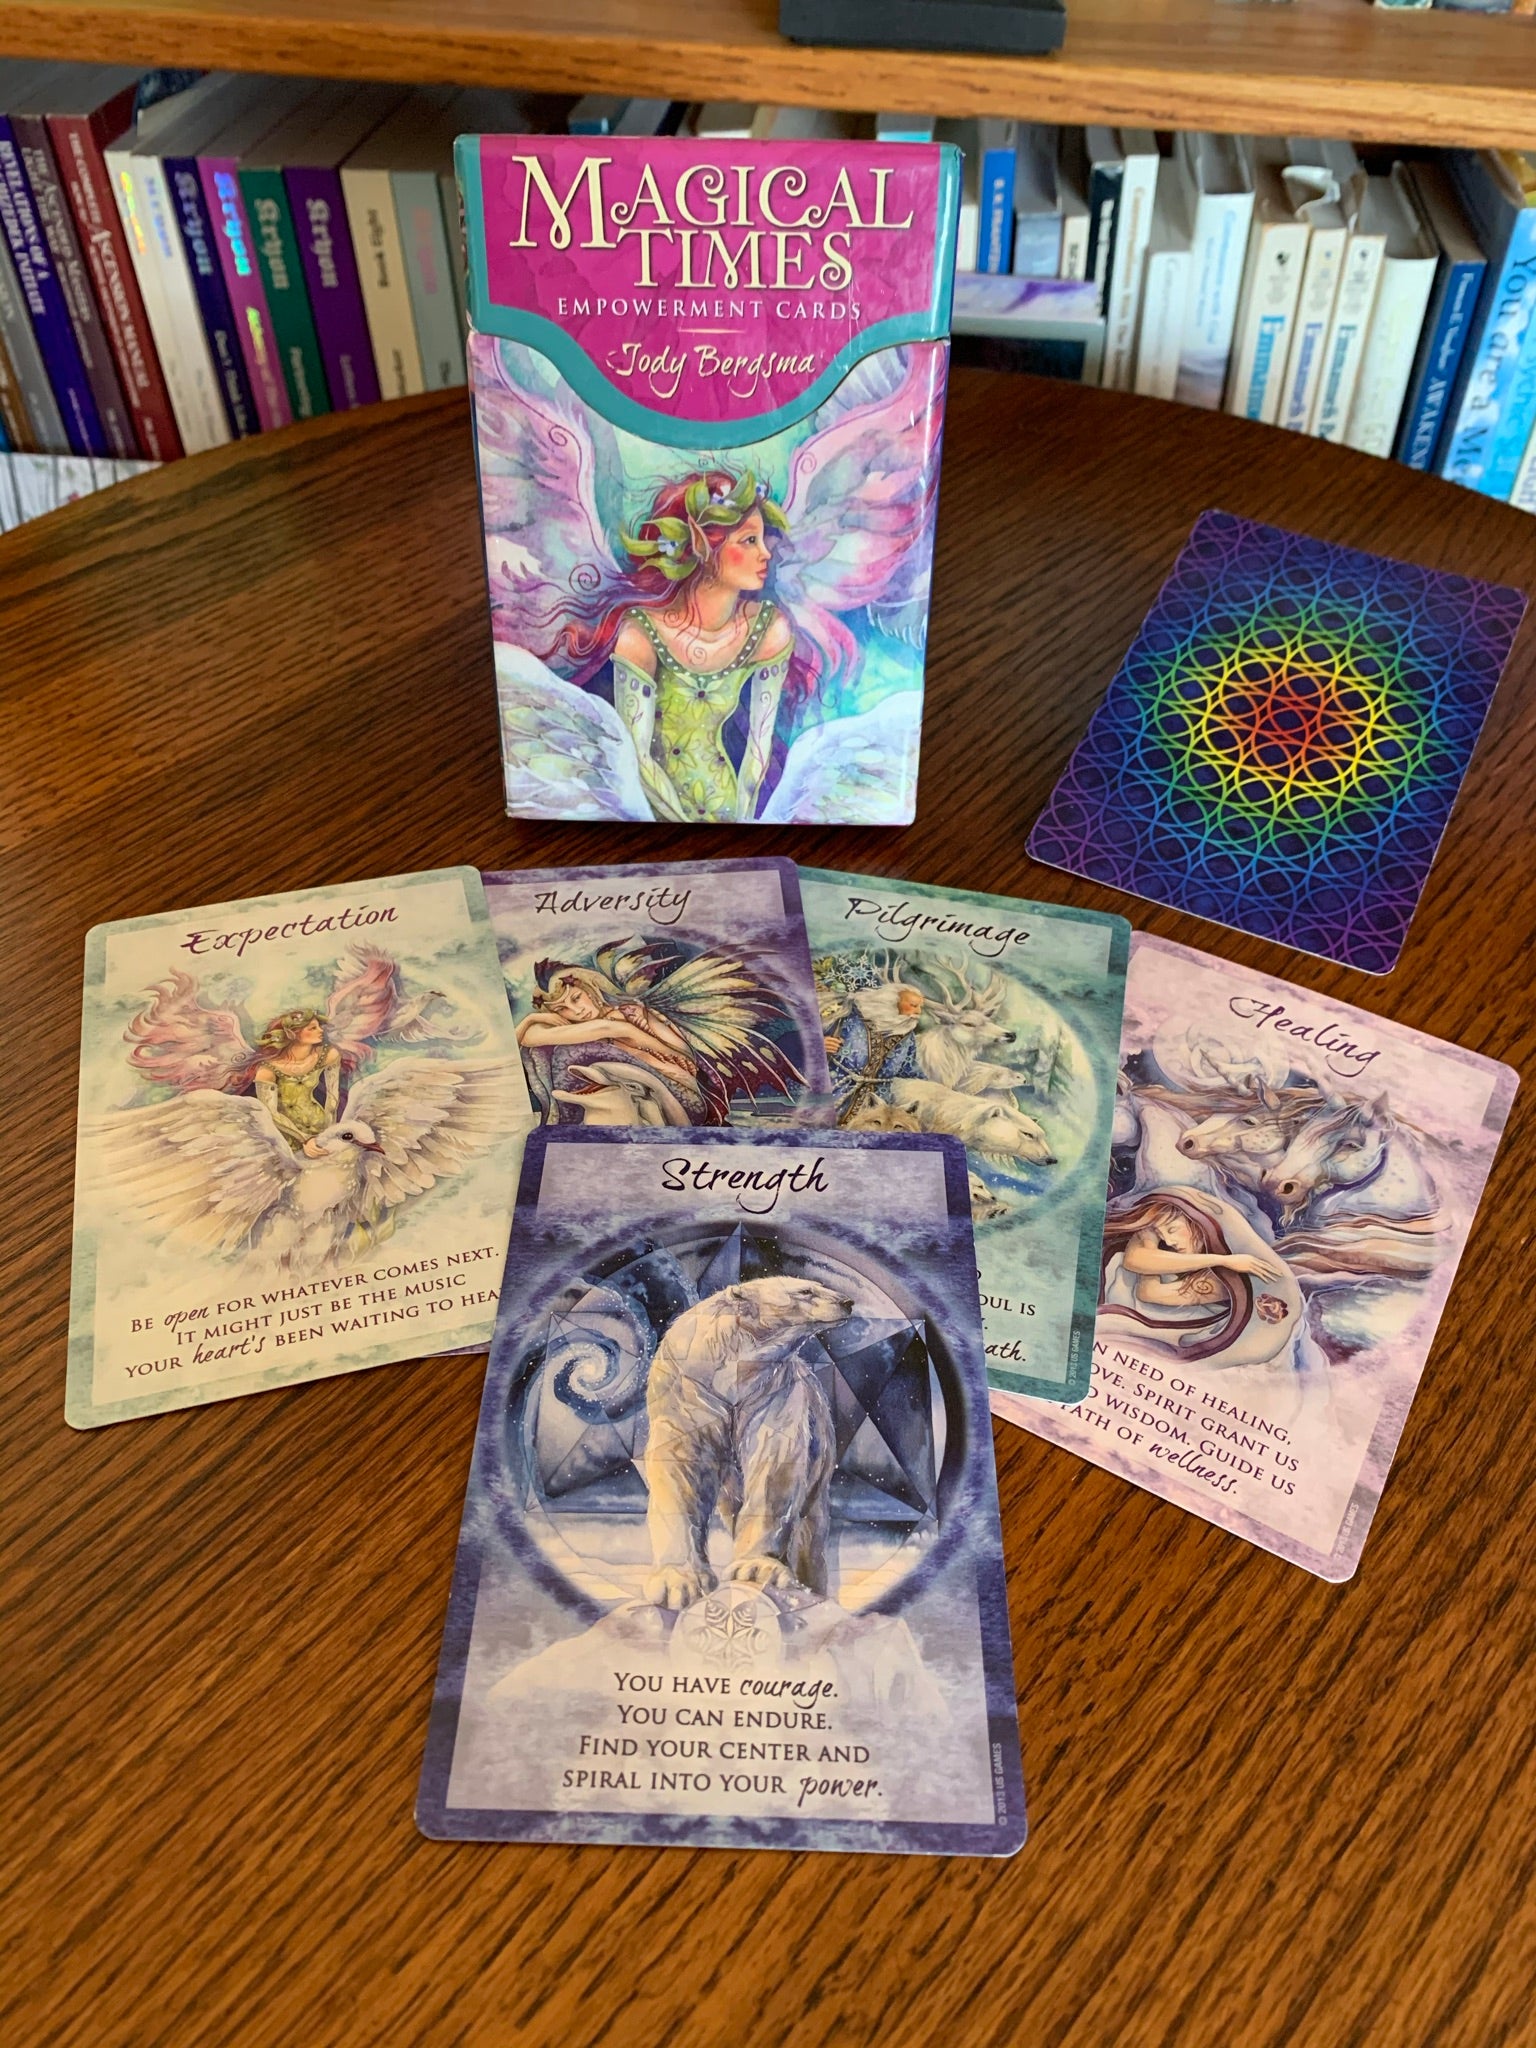 Magical Times Empowerment Cards consist of 44 beautifully illustrated cards by the artist, Jody Bergsma, a small, paper guide booklet and a very nice box for storage. You can use these cards as a regular oracle deck or for simply choosing a message with an affirmation for your day, week or month. I love this deck and like to follow up every reading with one of these wonderful cards. This photo is a display of 5 of the cards, the back of one of the cards and the box front. Price is $19.95.